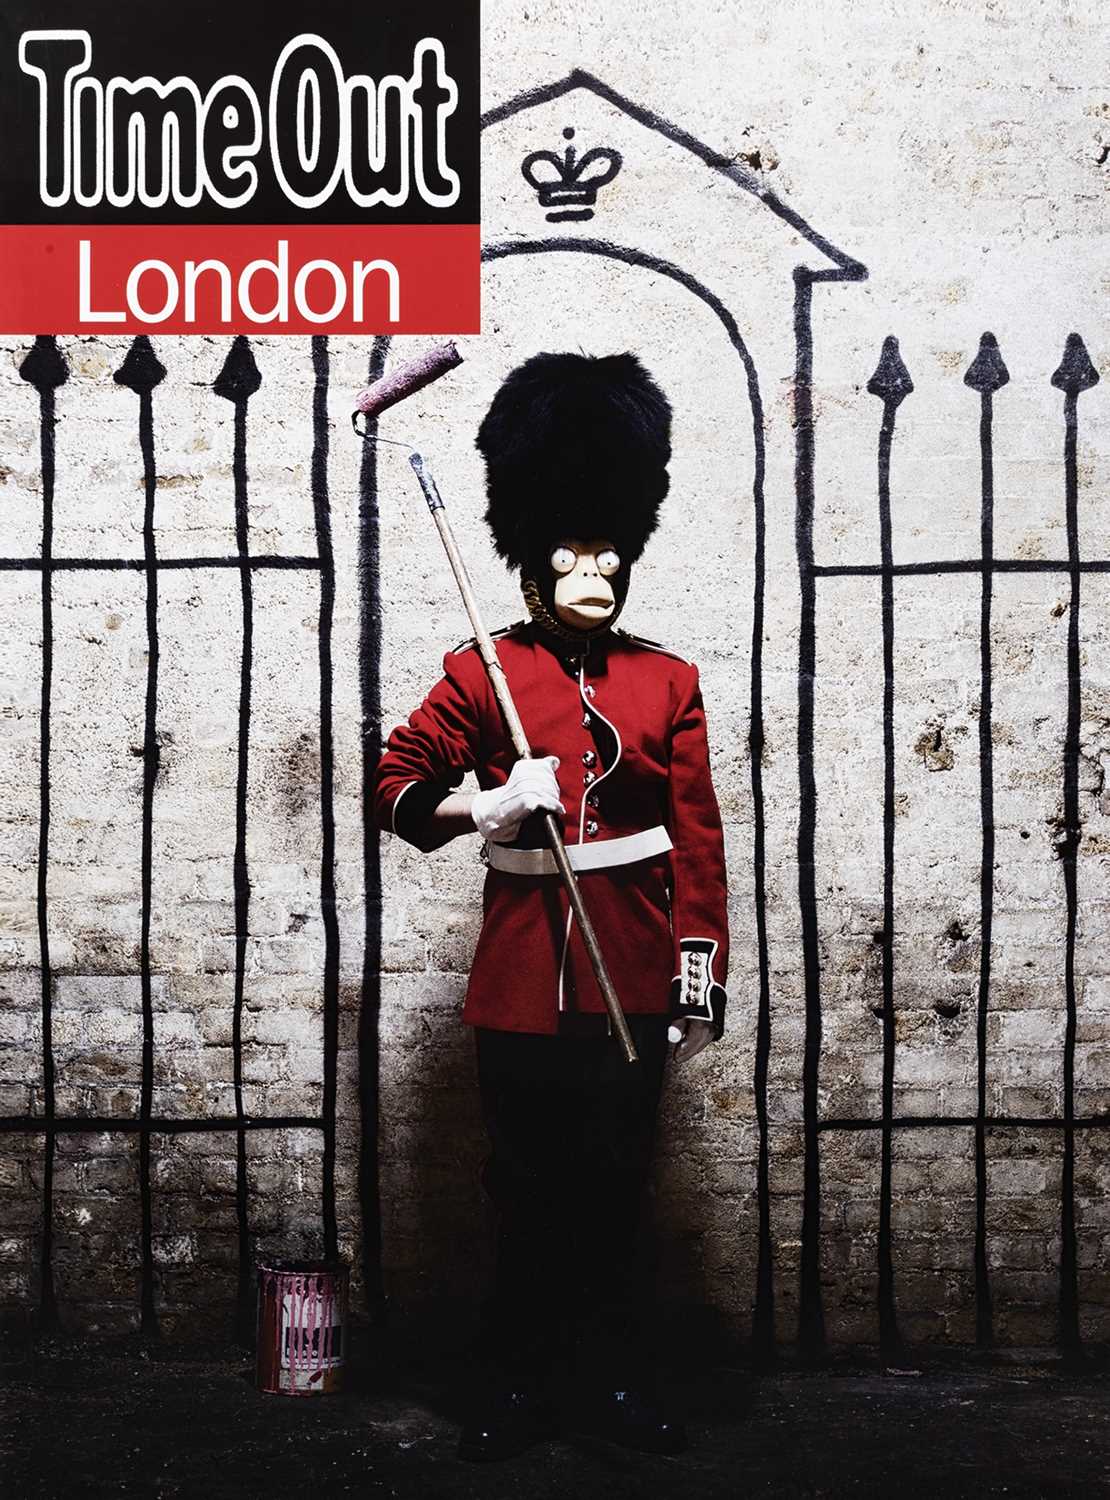 Lot 48 - Banksy (British 1974-), 'Time Out London', 2010